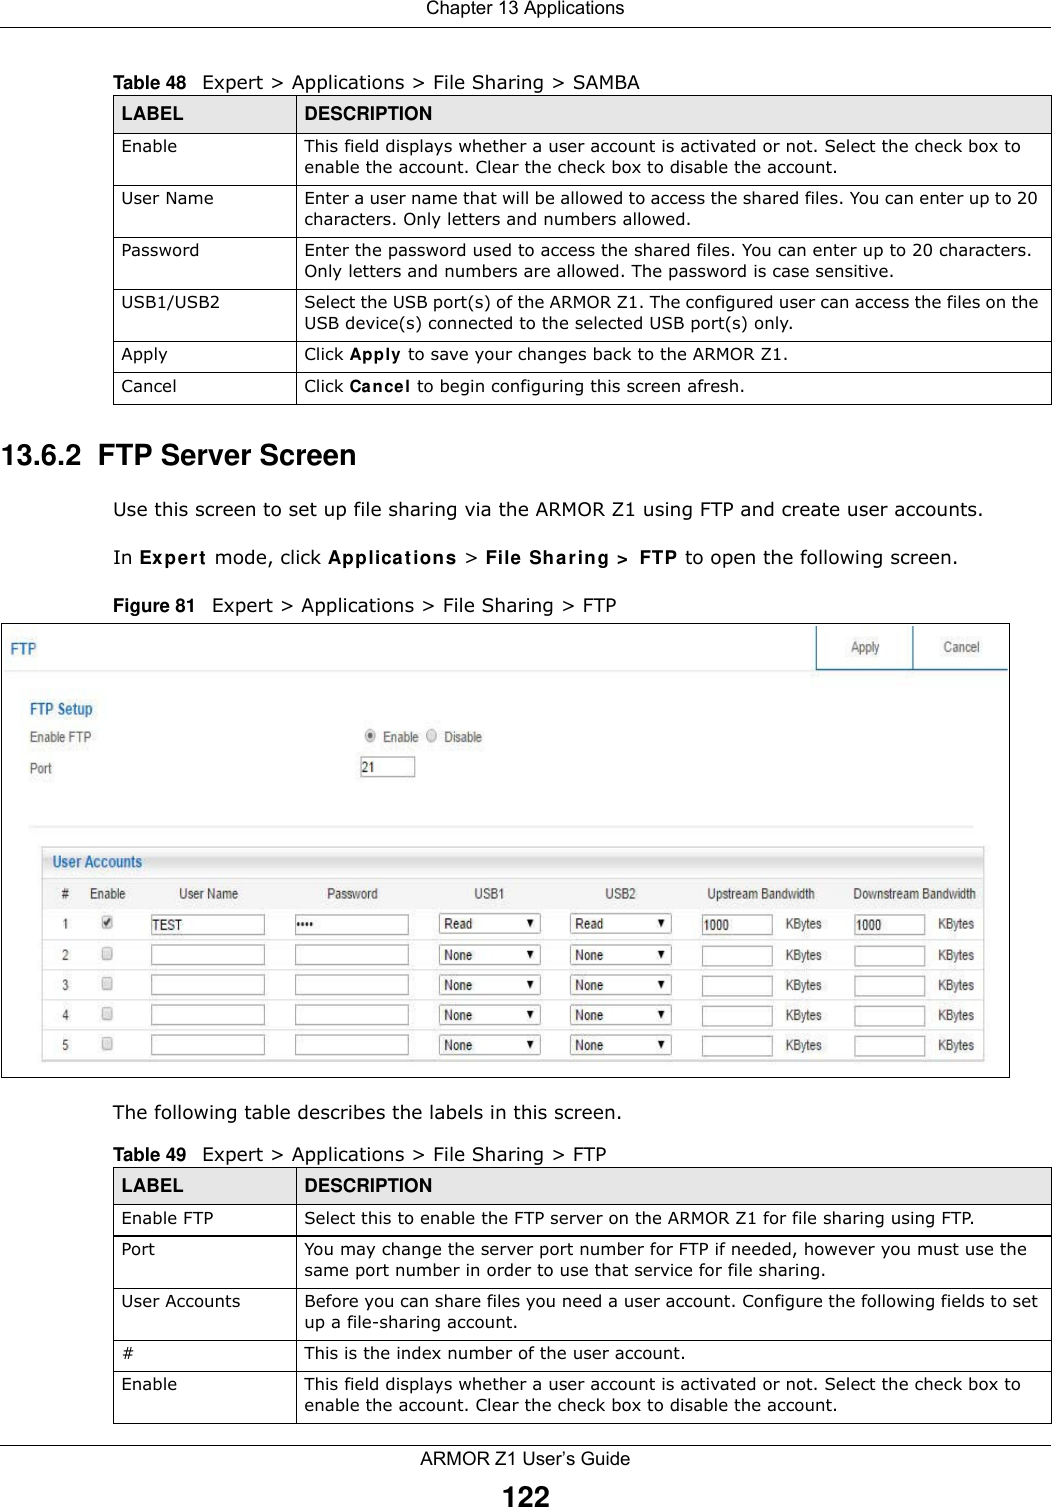 Chapter 13 ApplicationsARMOR Z1 User’s Guide12213.6.2  FTP Server ScreenUse this screen to set up file sharing via the ARMOR Z1 using FTP and create user accounts. In Expert mode, click Applications &gt; File Sharing &gt; FTP to open the following screen.Figure 81   Expert &gt; Applications &gt; File Sharing &gt; FTP  The following table describes the labels in this screen.Enable This field displays whether a user account is activated or not. Select the check box to enable the account. Clear the check box to disable the account.User Name Enter a user name that will be allowed to access the shared files. You can enter up to 20 characters. Only letters and numbers allowed.Password Enter the password used to access the shared files. You can enter up to 20 characters. Only letters and numbers are allowed. The password is case sensitive.USB1/USB2 Select the USB port(s) of the ARMOR Z1. The configured user can access the files on the USB device(s) connected to the selected USB port(s) only.Apply Click Apply to save your changes back to the ARMOR Z1.Cancel Click Cancel to begin configuring this screen afresh.Table 48   Expert &gt; Applications &gt; File Sharing &gt; SAMBALABEL DESCRIPTIONTable 49   Expert &gt; Applications &gt; File Sharing &gt; FTP LABEL DESCRIPTIONEnable FTP Select this to enable the FTP server on the ARMOR Z1 for file sharing using FTP.Port You may change the server port number for FTP if needed, however you must use the same port number in order to use that service for file sharing.User Accounts Before you can share files you need a user account. Configure the following fields to set up a file-sharing account. #This is the index number of the user account.Enable This field displays whether a user account is activated or not. Select the check box to enable the account. Clear the check box to disable the account.